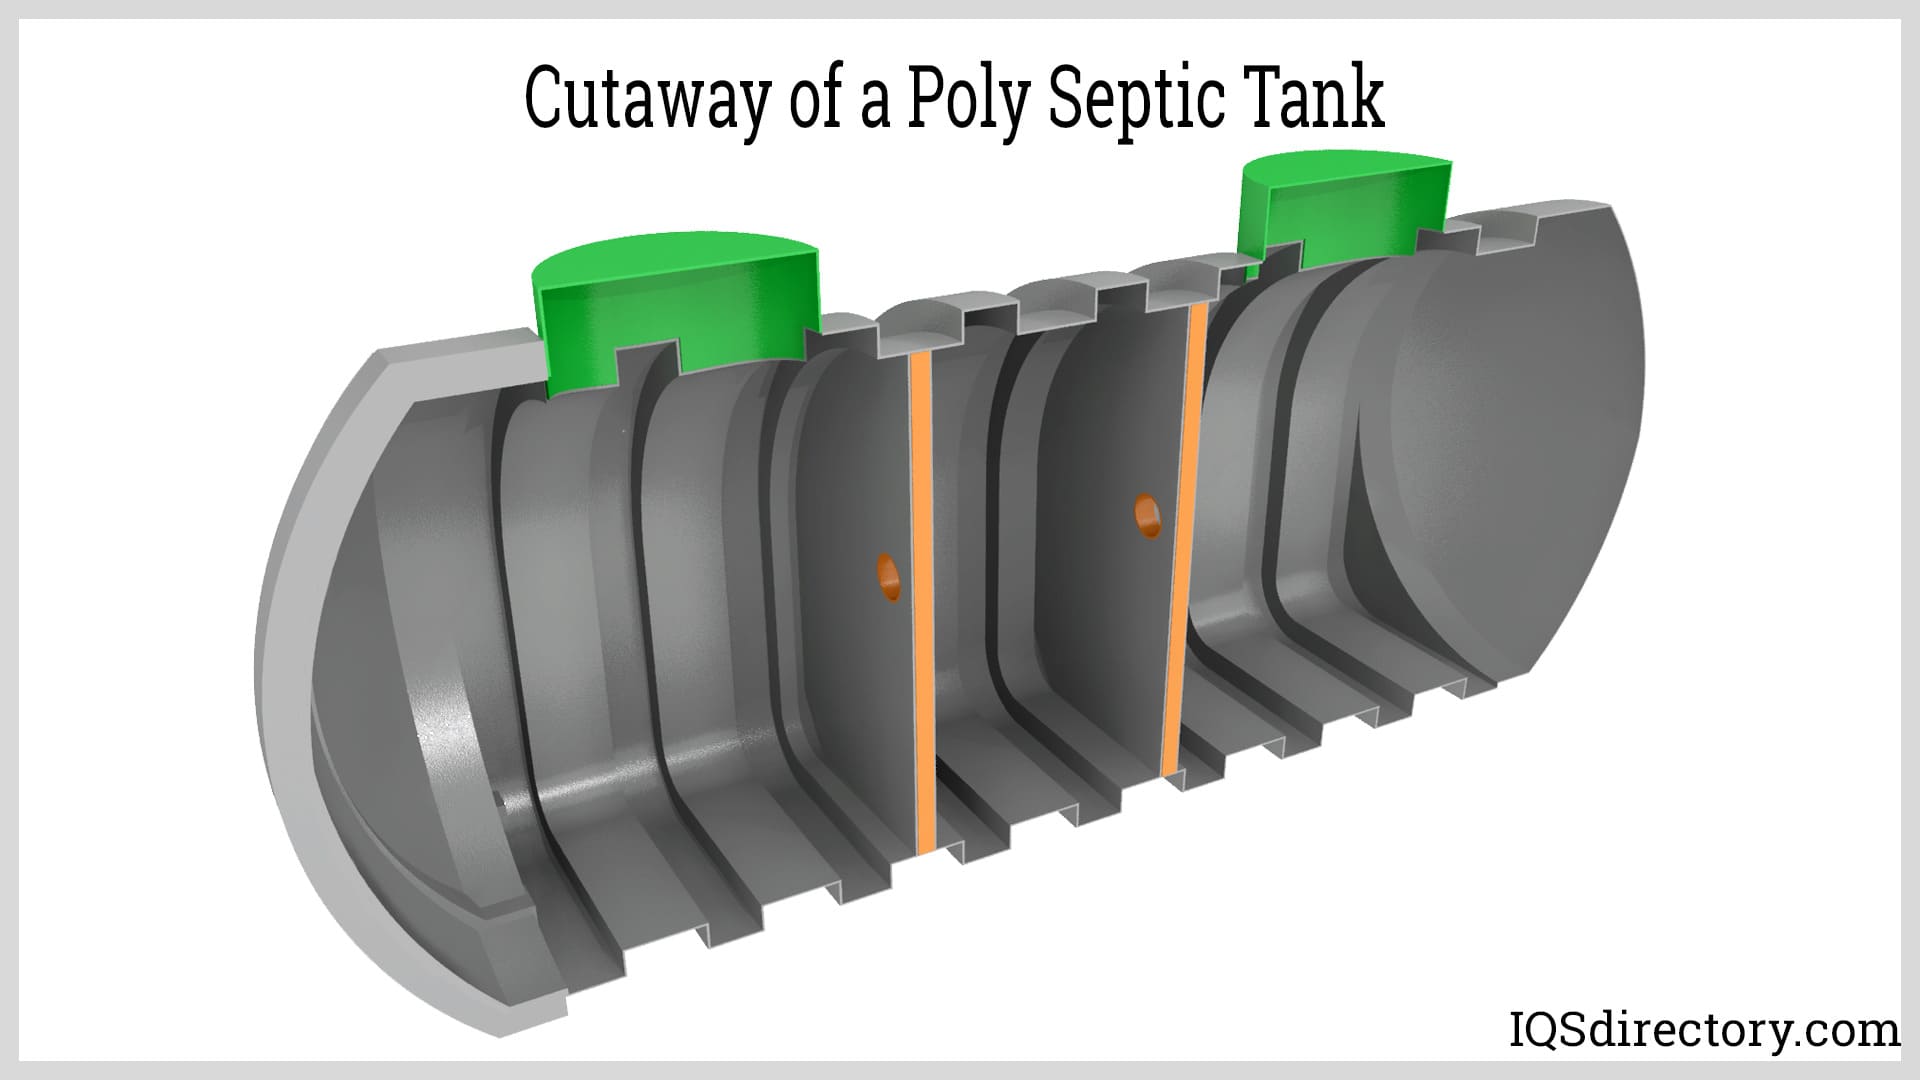 Cutaway of a Poly Septic Tank